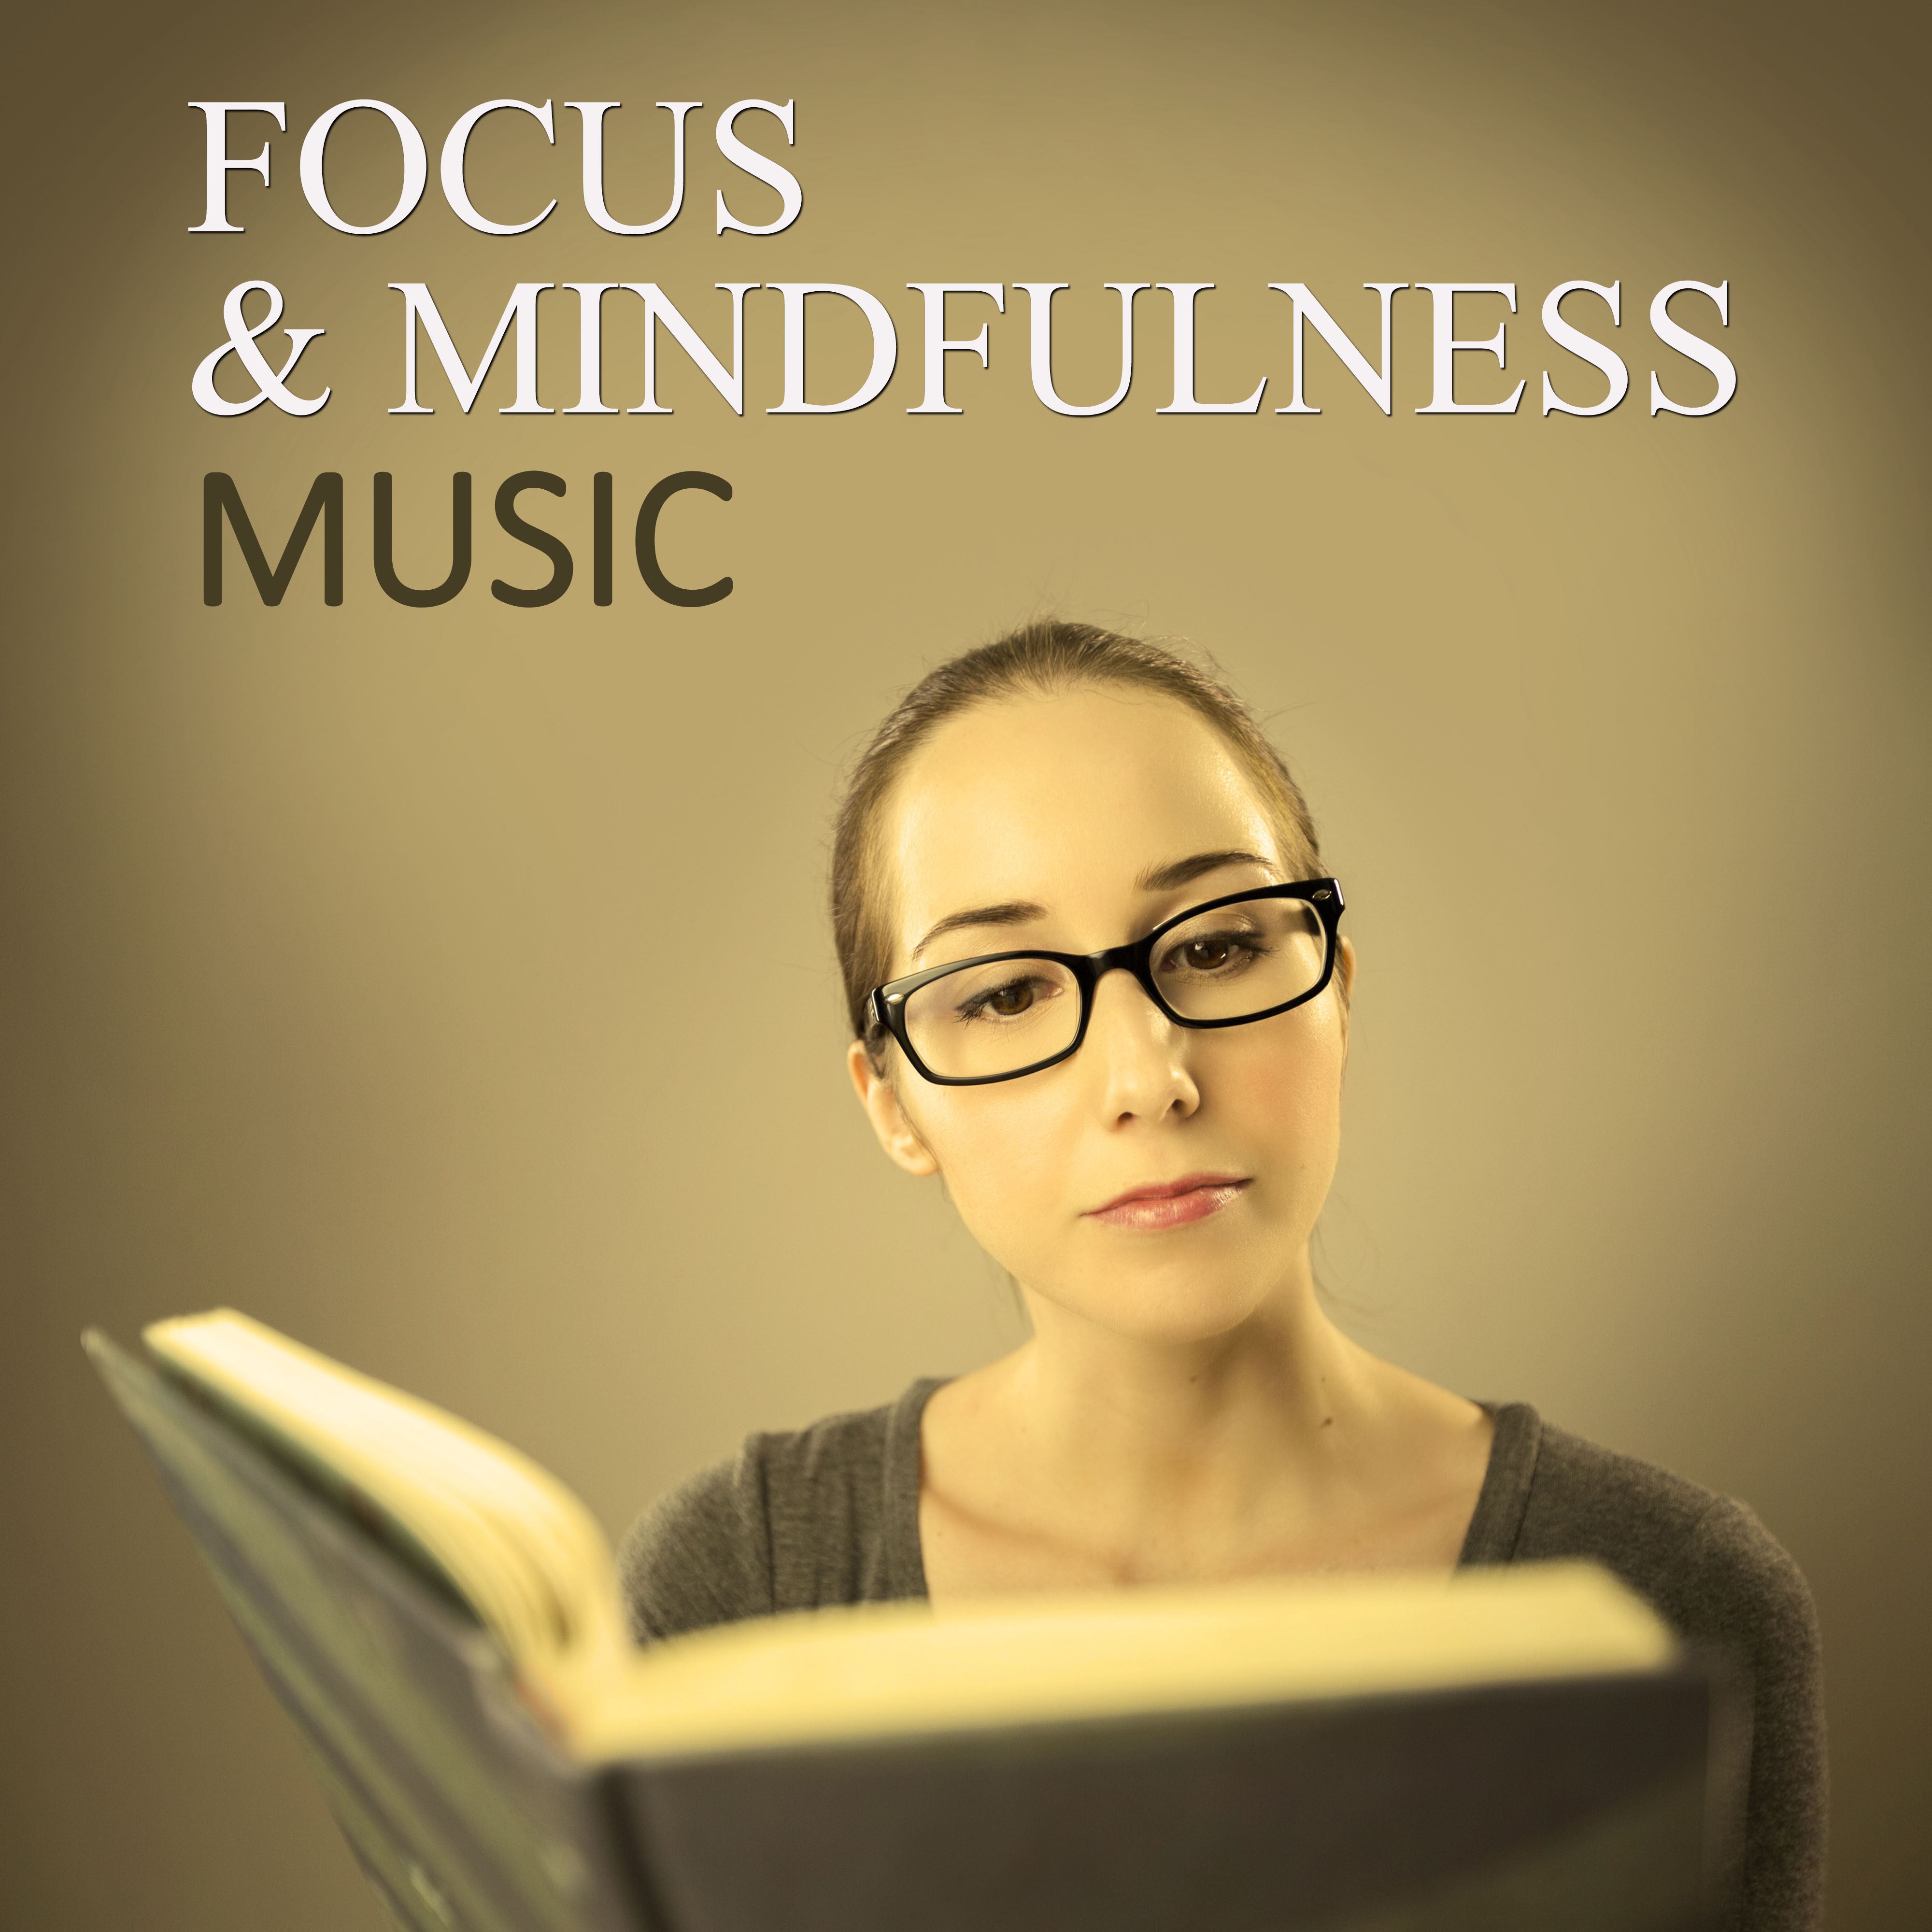 Focus  Mindfulness Music  Gentle New Age Music for Improve Concentration on the Tasks, Calm Down Emotions and Work Better, Music for Studying, Instrumental Relaxing Music for Learning